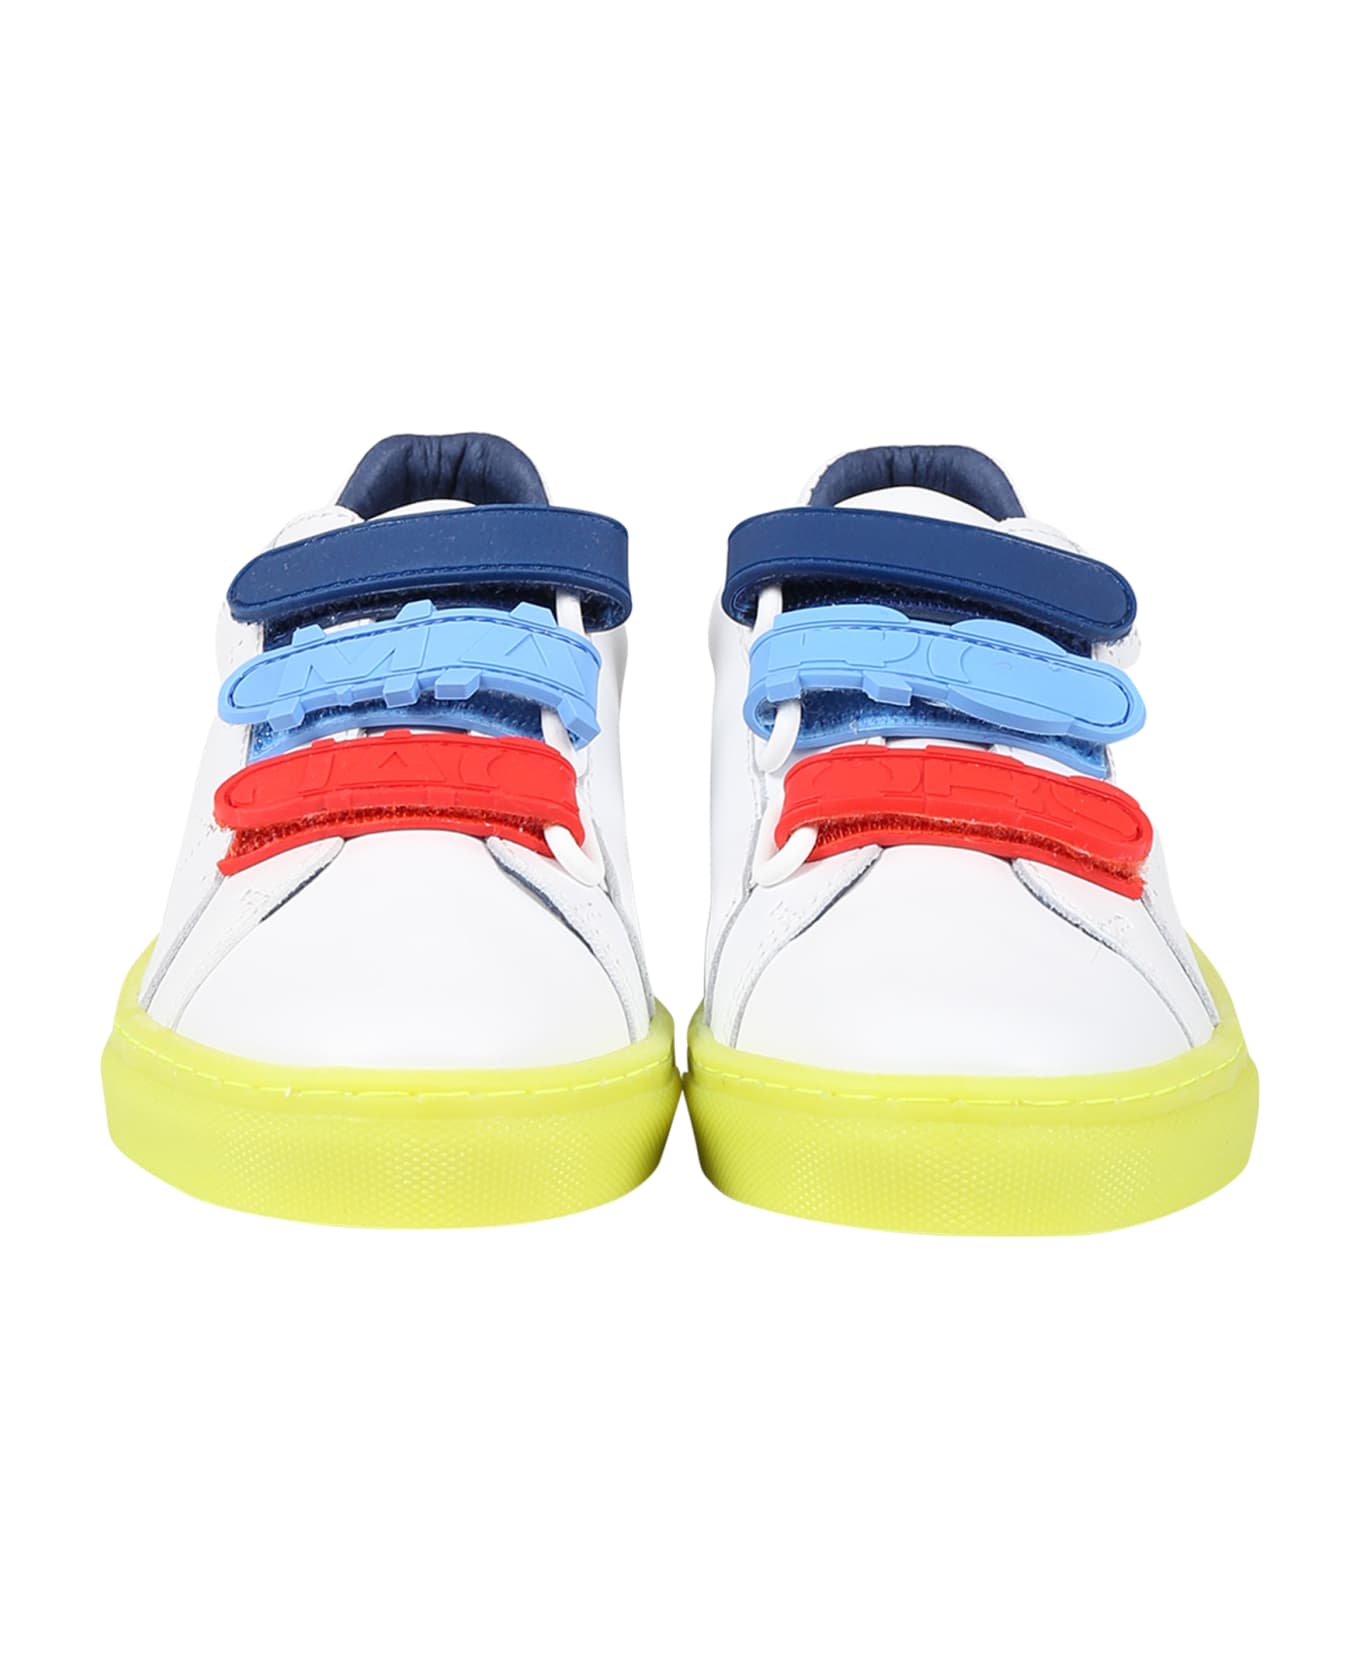 Marc Jacobs White Sneakers For Boy With Logo - White